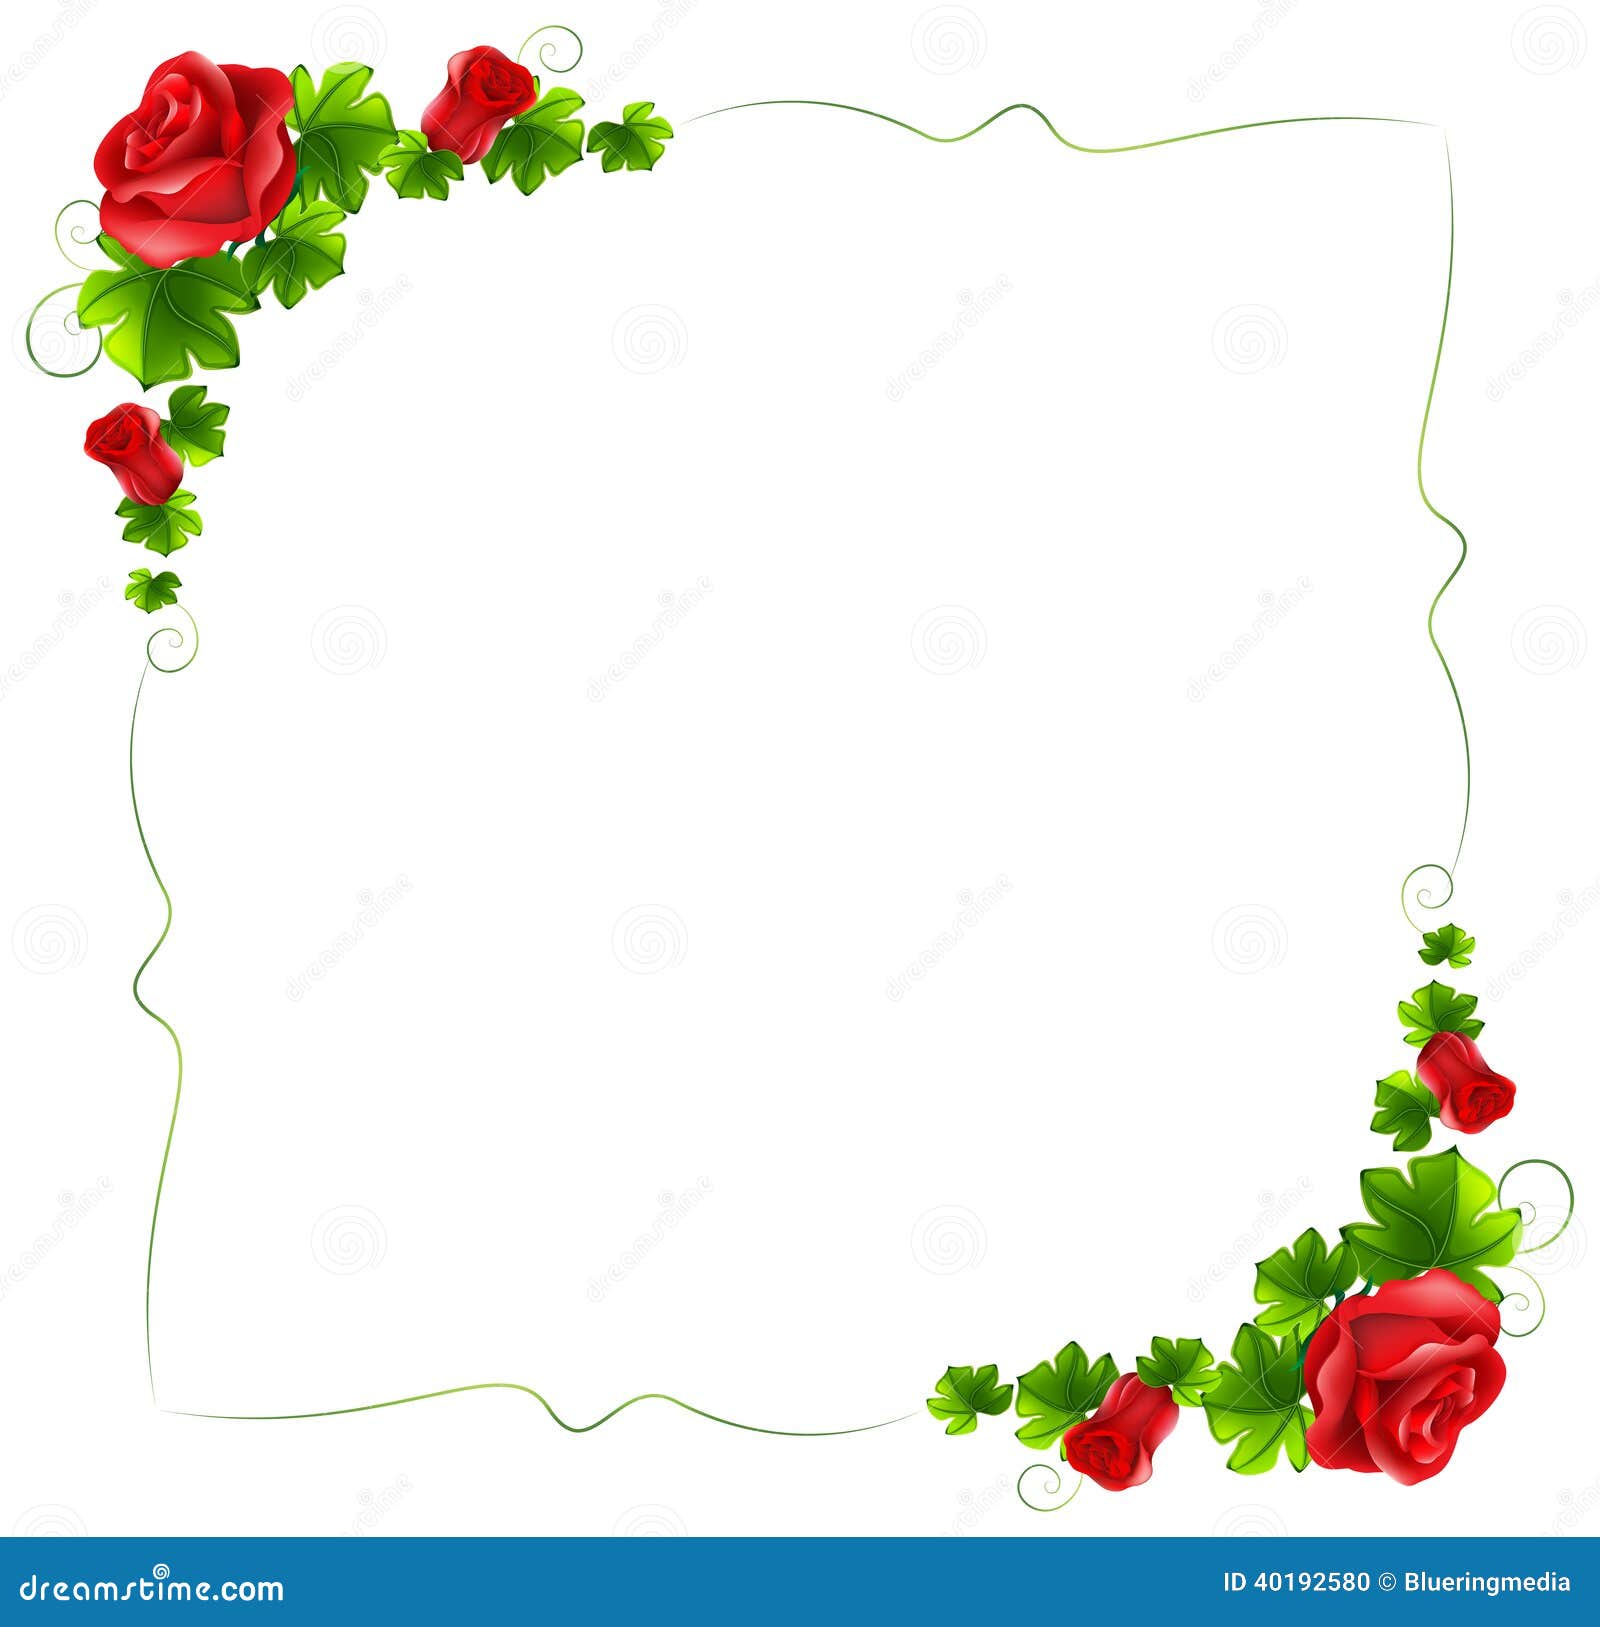 A Floral Border With Red Roses Stock Vector - Image: 40192580